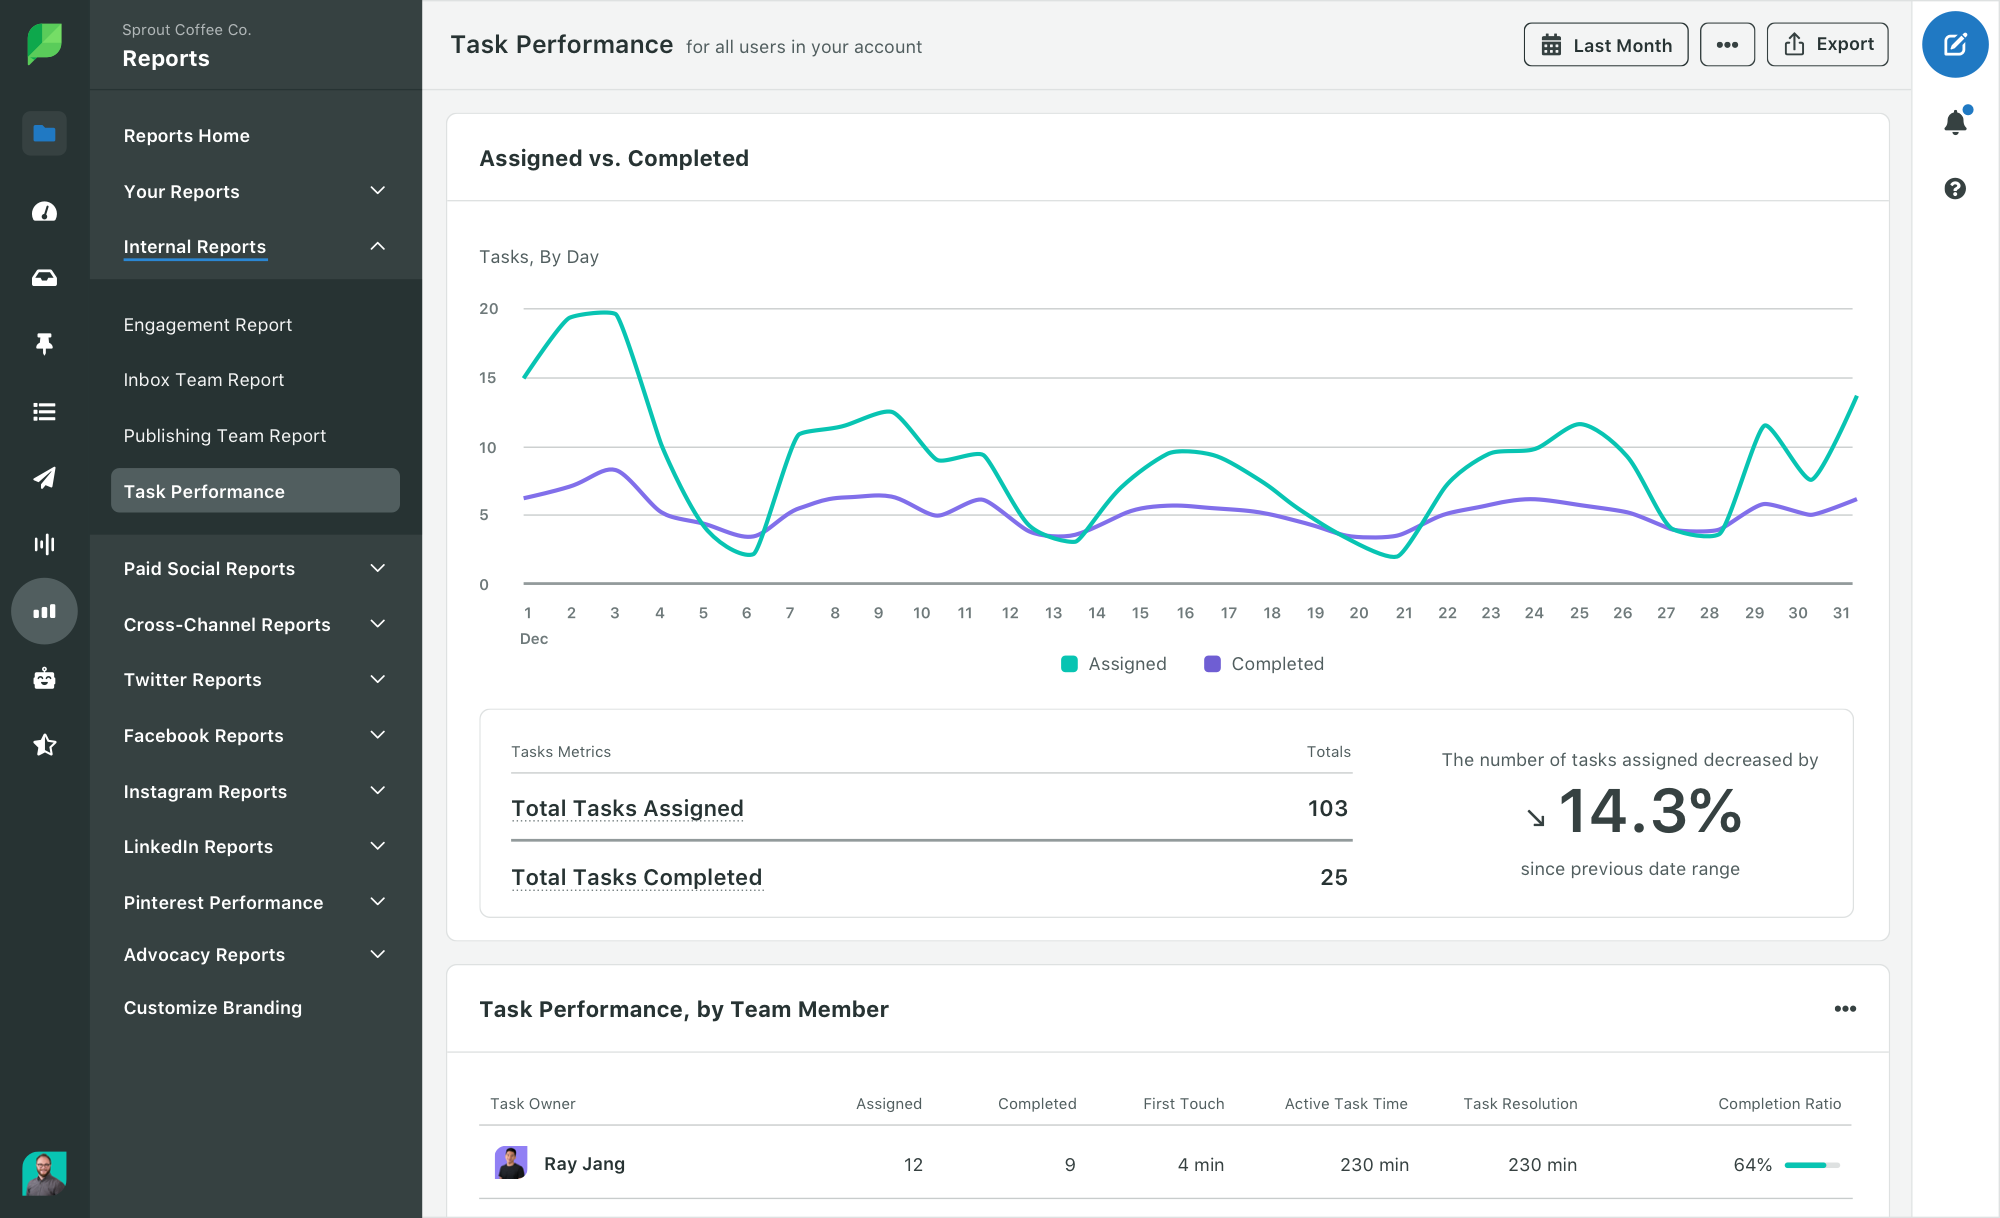 A screenshot of Sprout's Task Performance Report that demonstrates task metrics overall (total assigned compared to total completed) and broken down by team member performance.